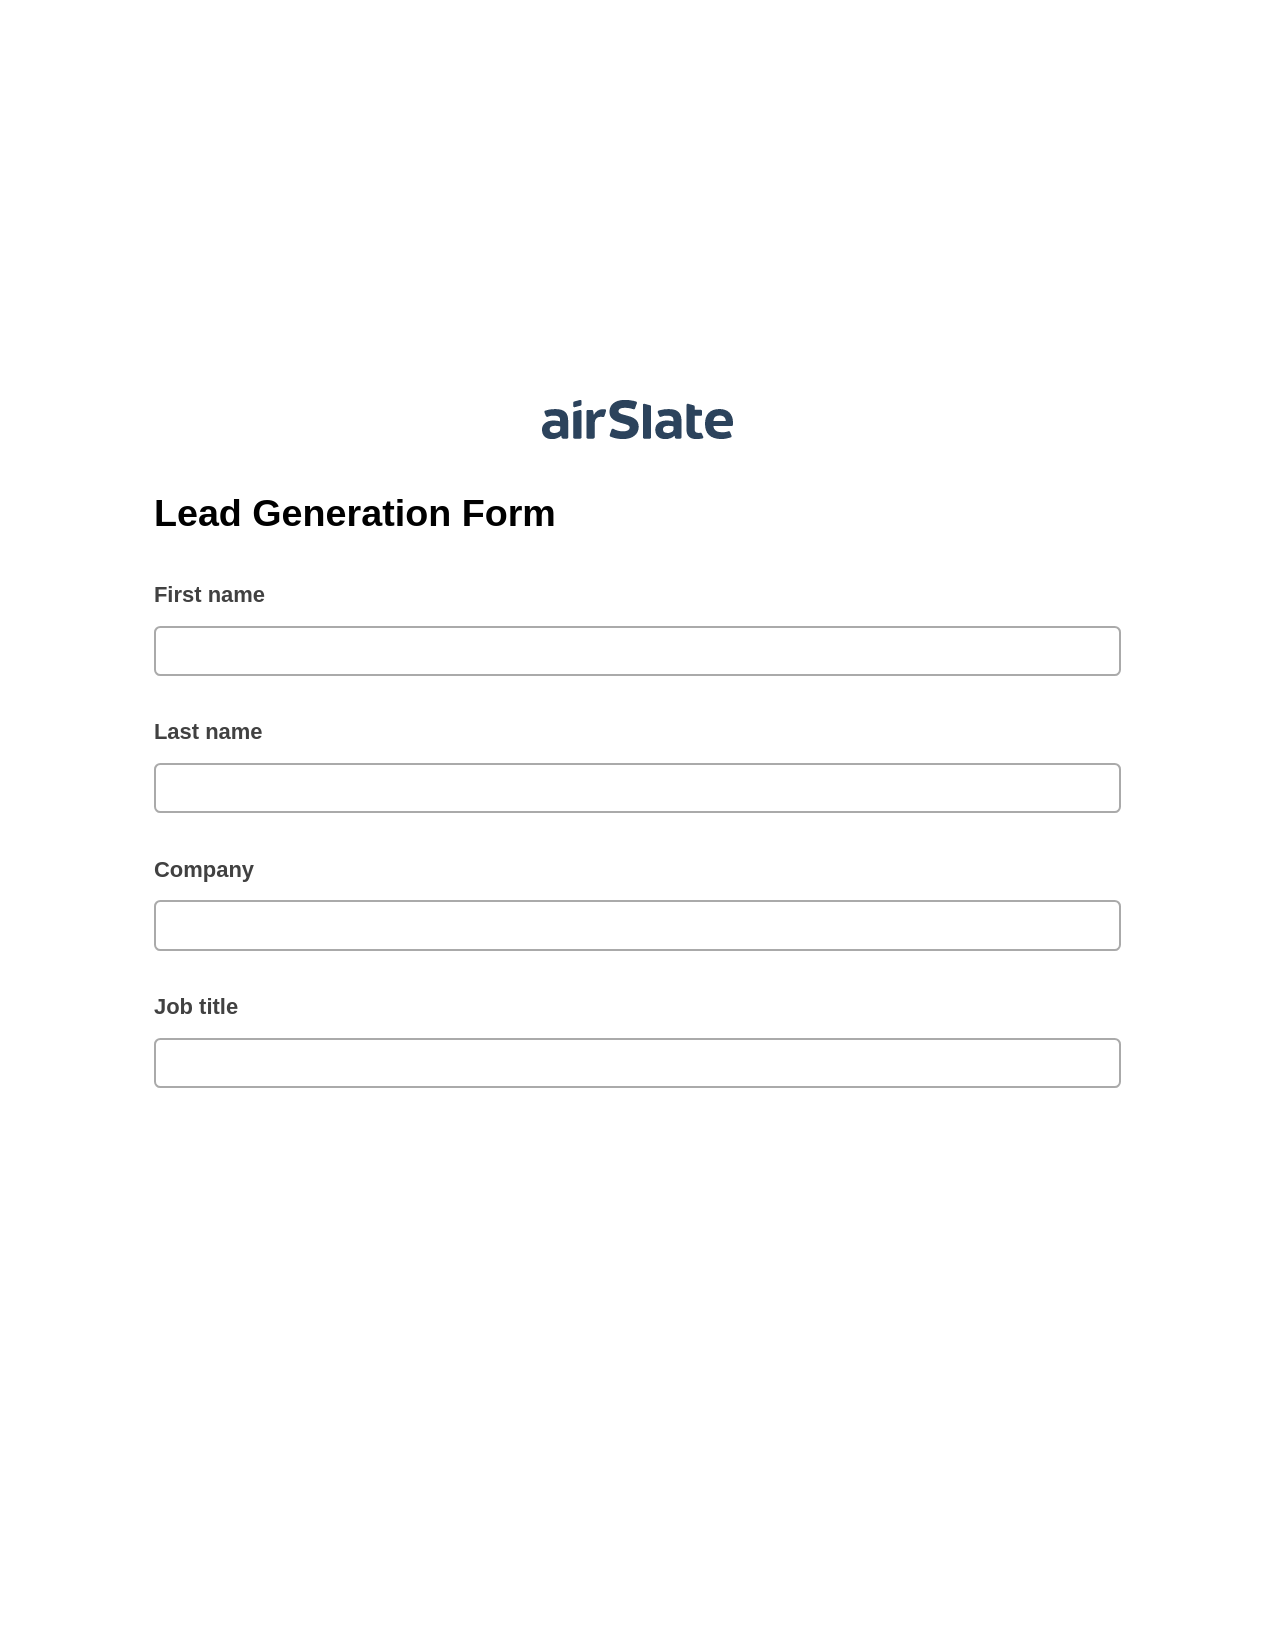 Lead Generation Form Pre-fill from Salesforce Records Bot, Assign Roles to Recipients Bot, Archive to SharePoint Folder Bot